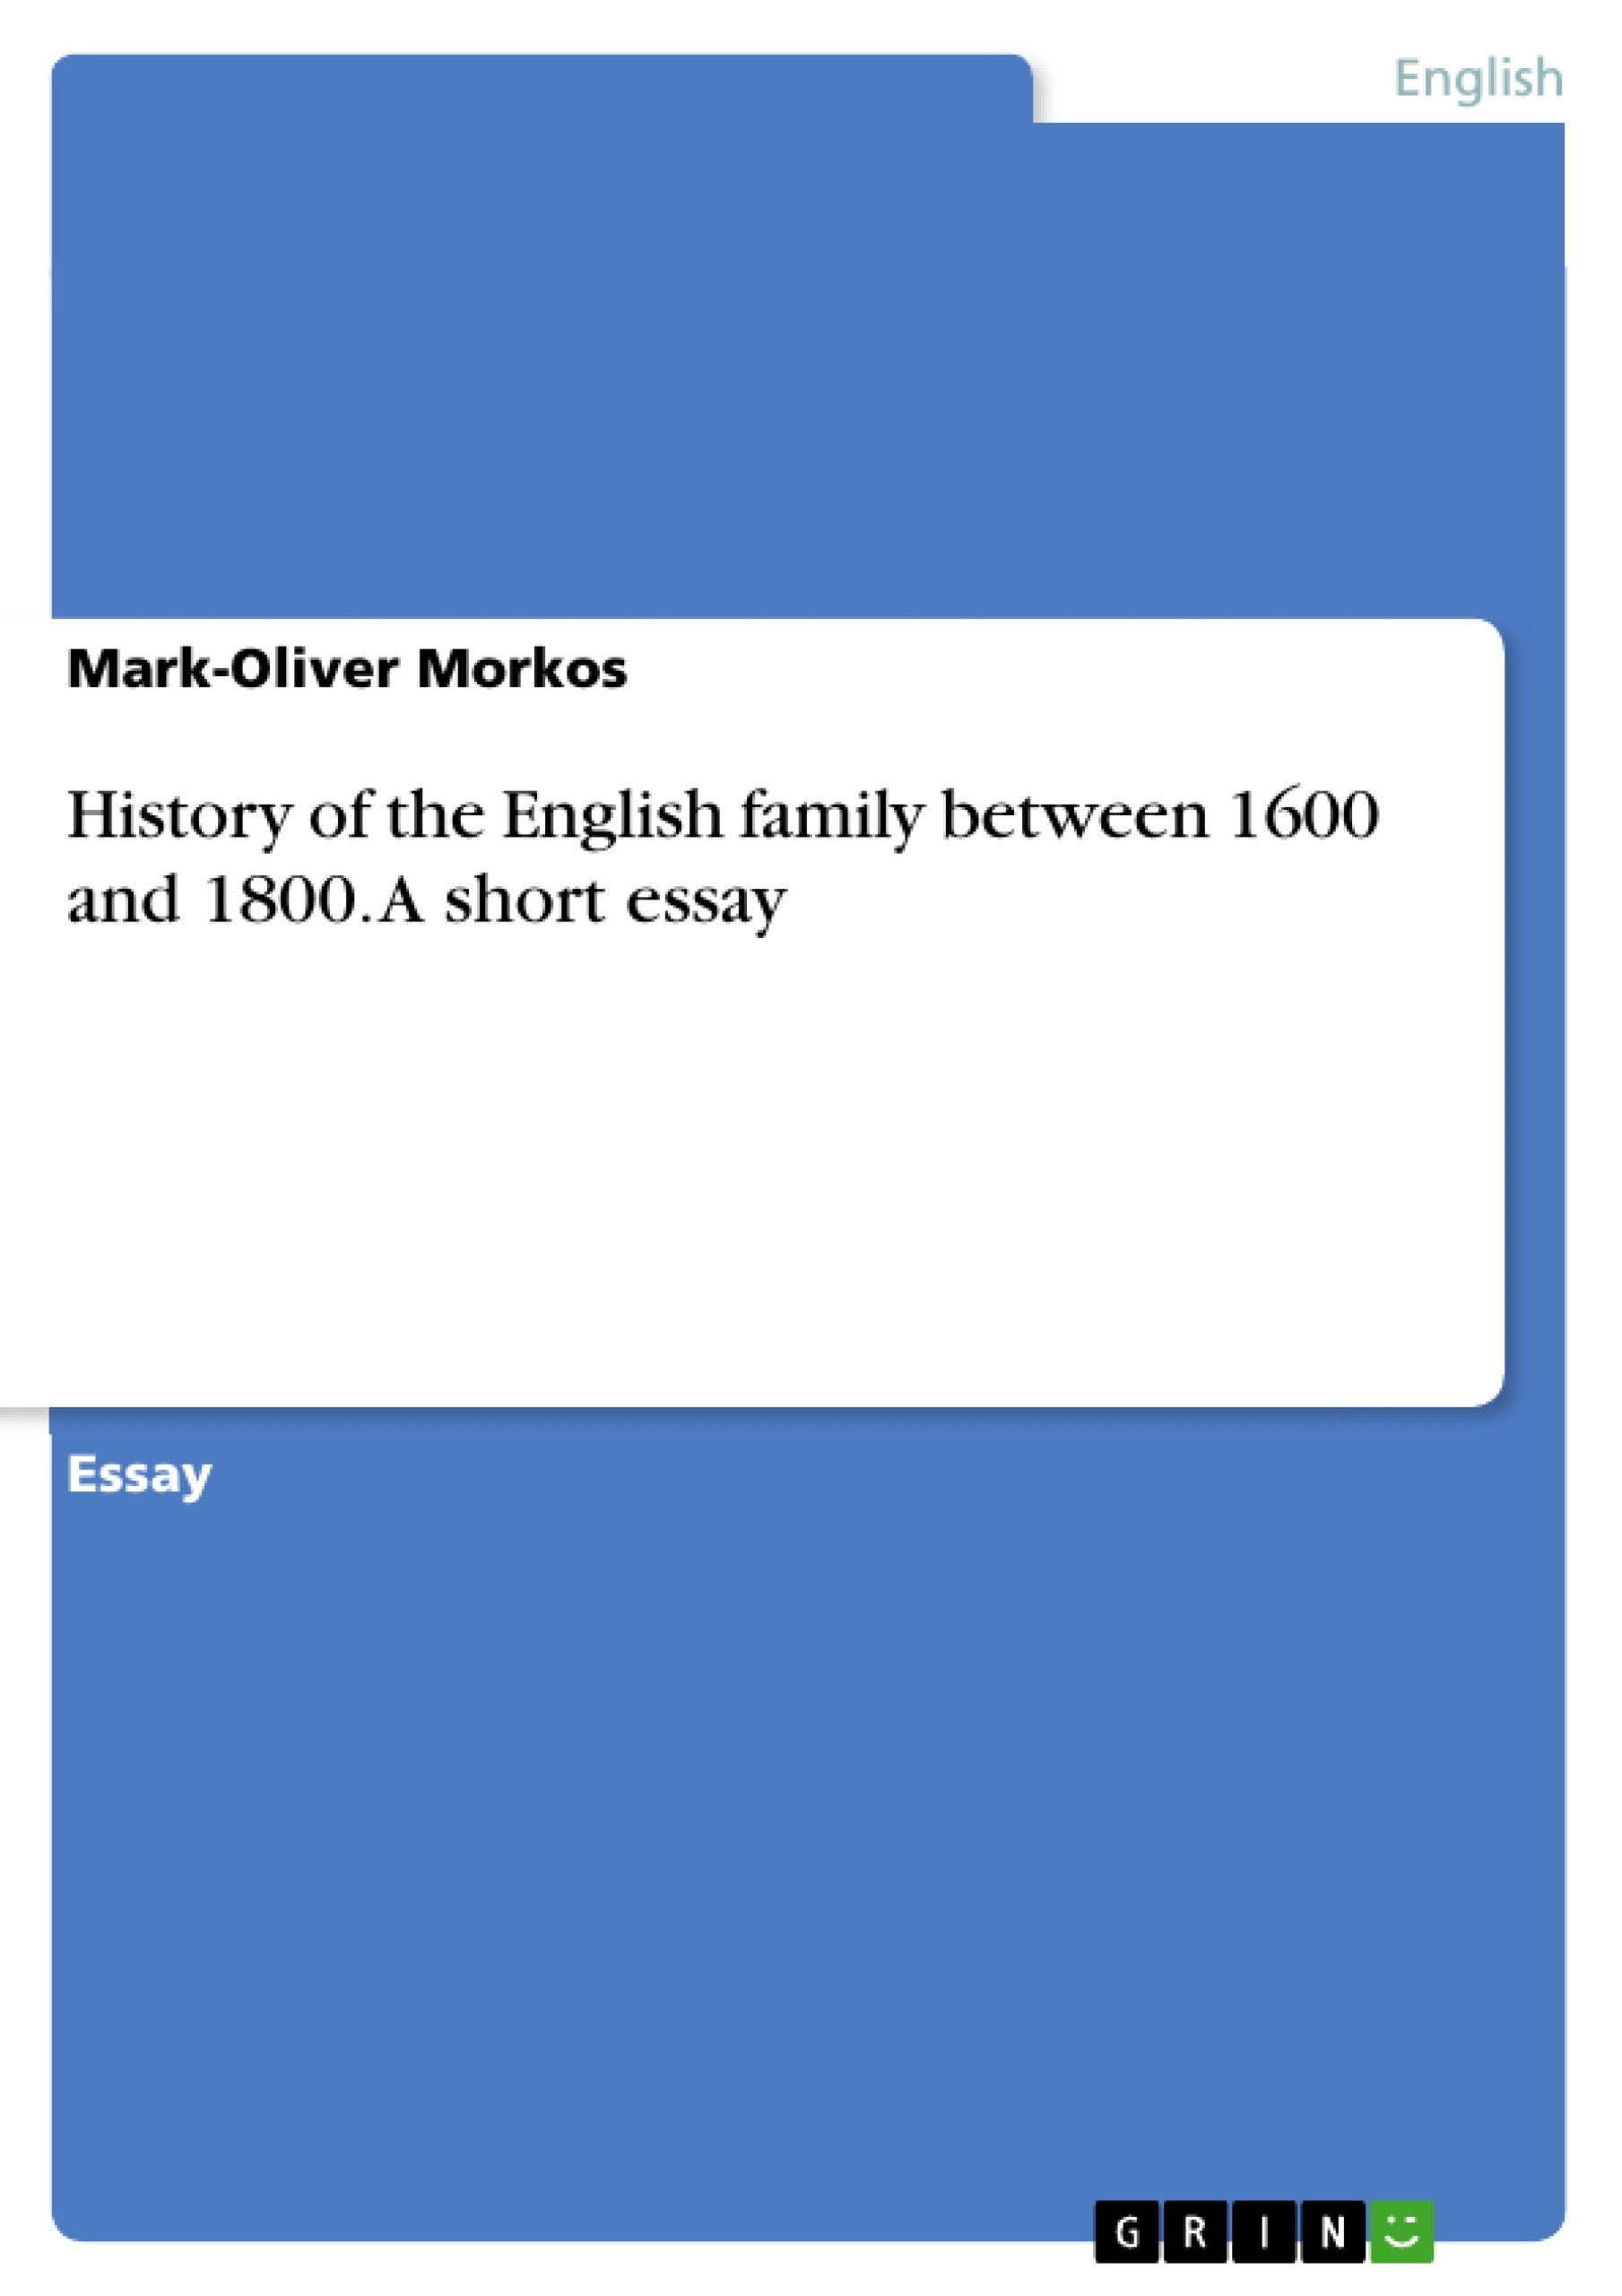 Título: History of the English family between 1600 and 1800. A short essay